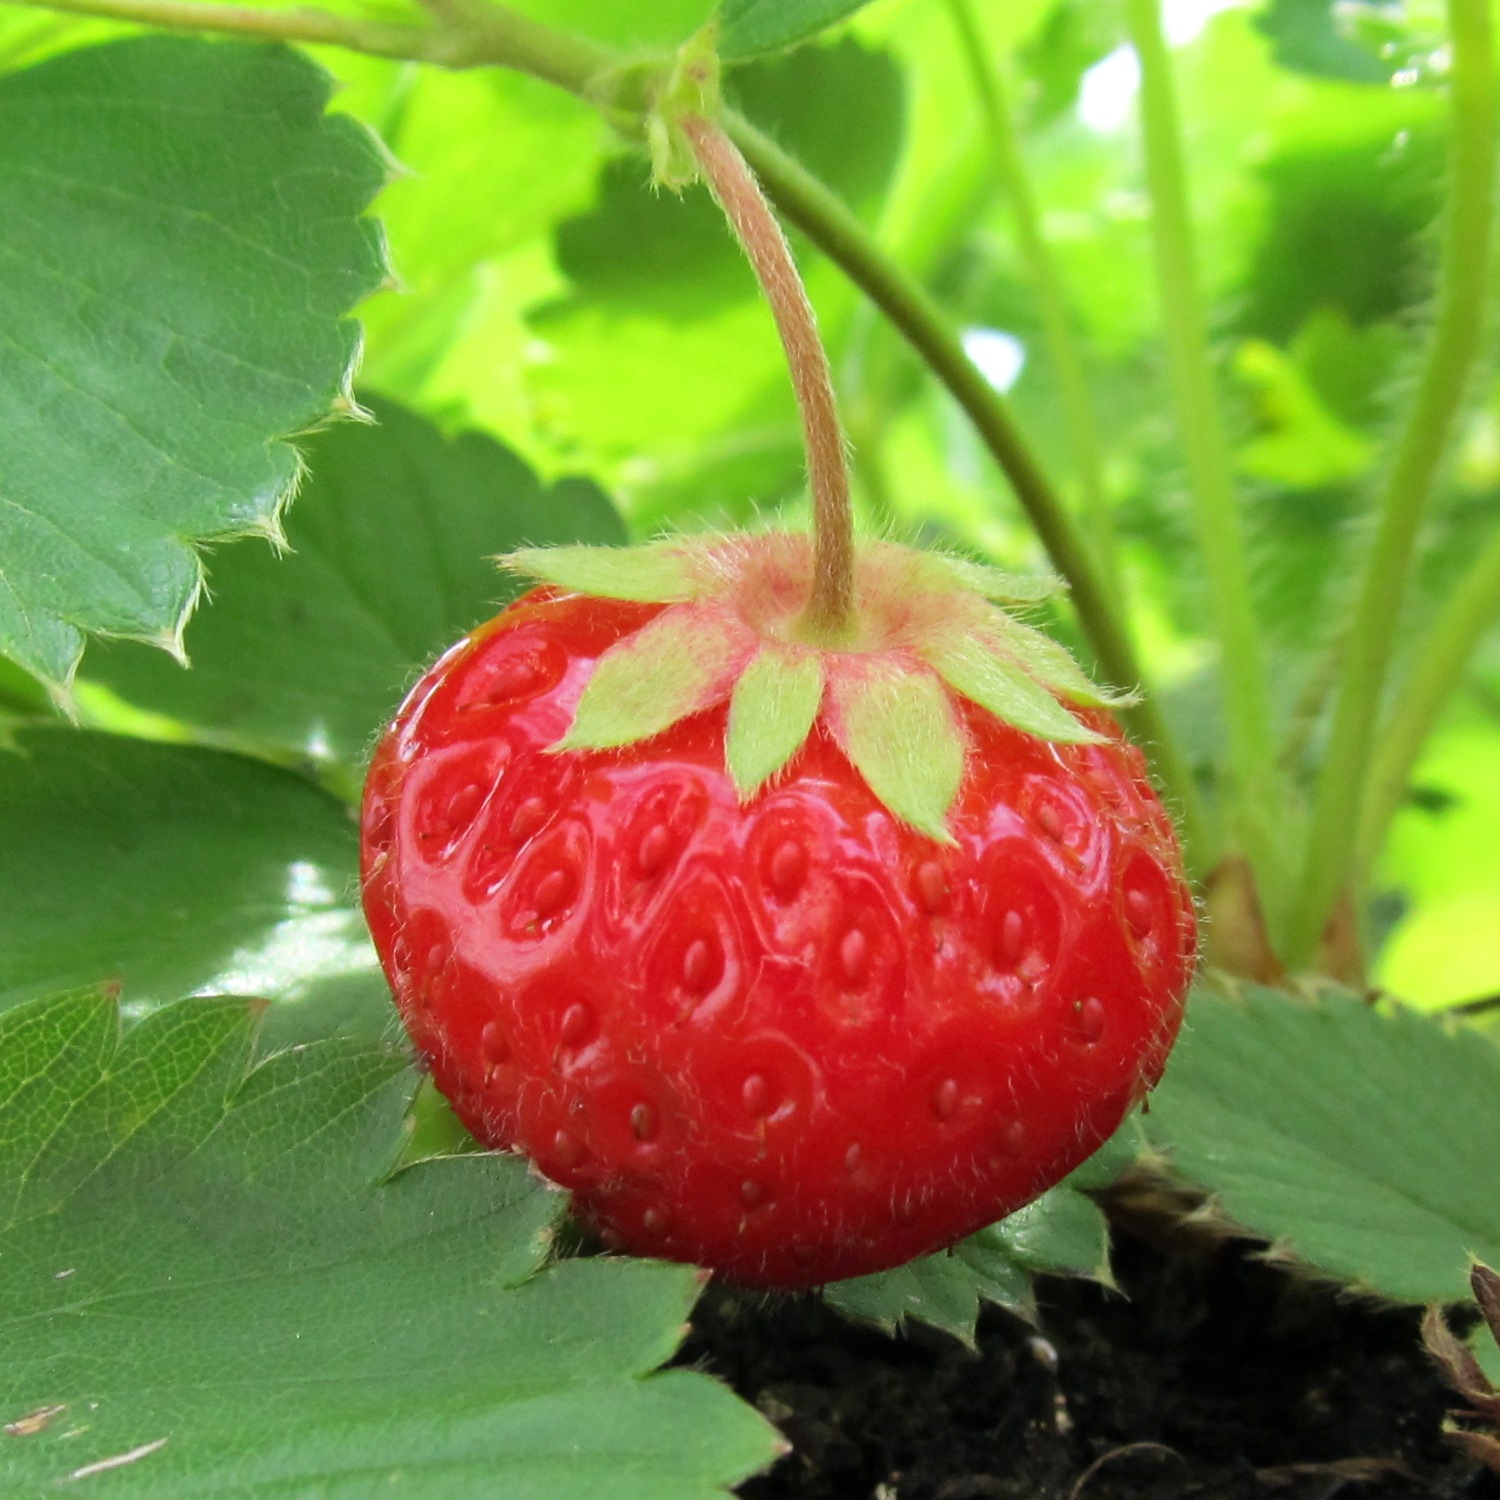 a bright ripe red strawberry sits among green leaves